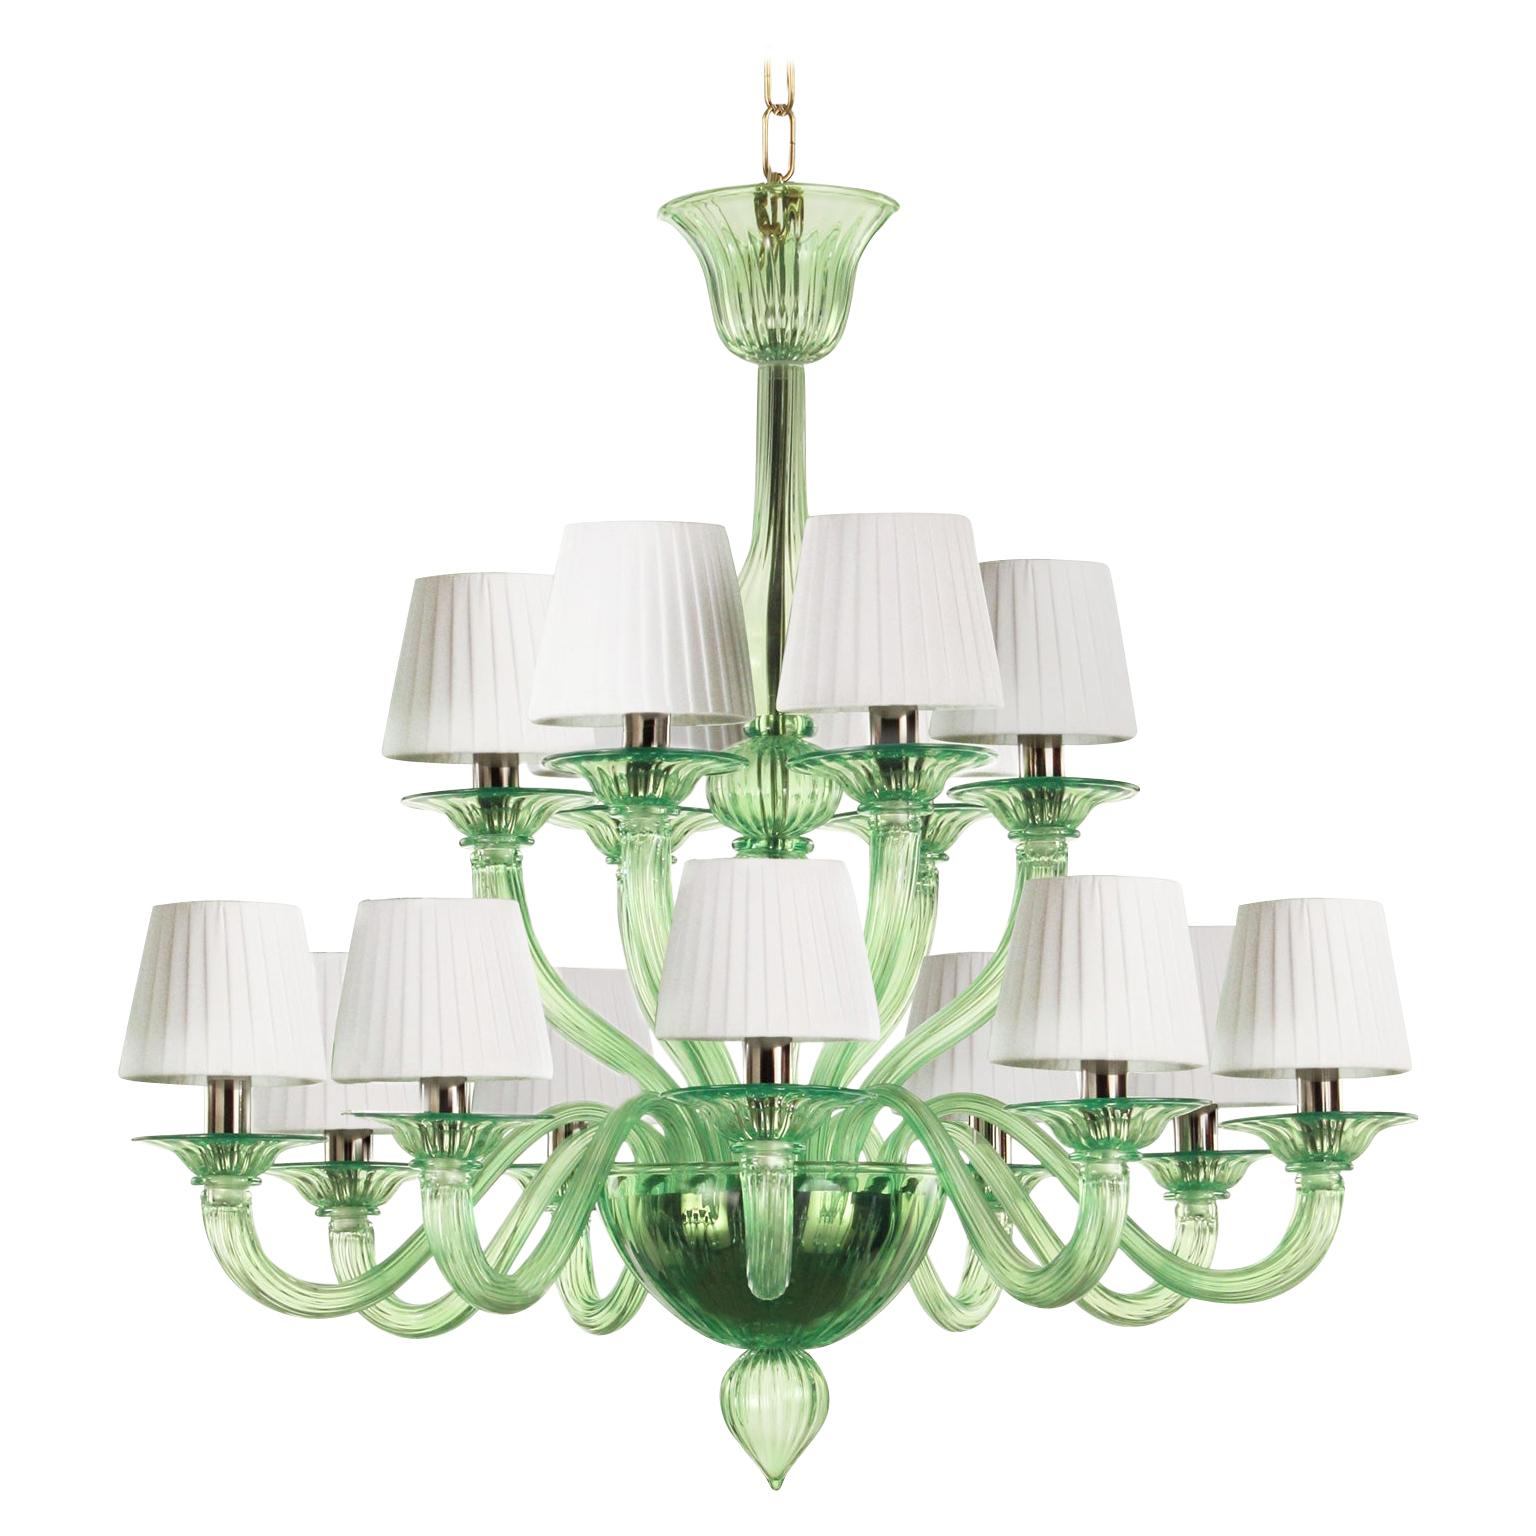 21st Century artistic Chandelier 9+6arms Green Murano Glass by Multiforme